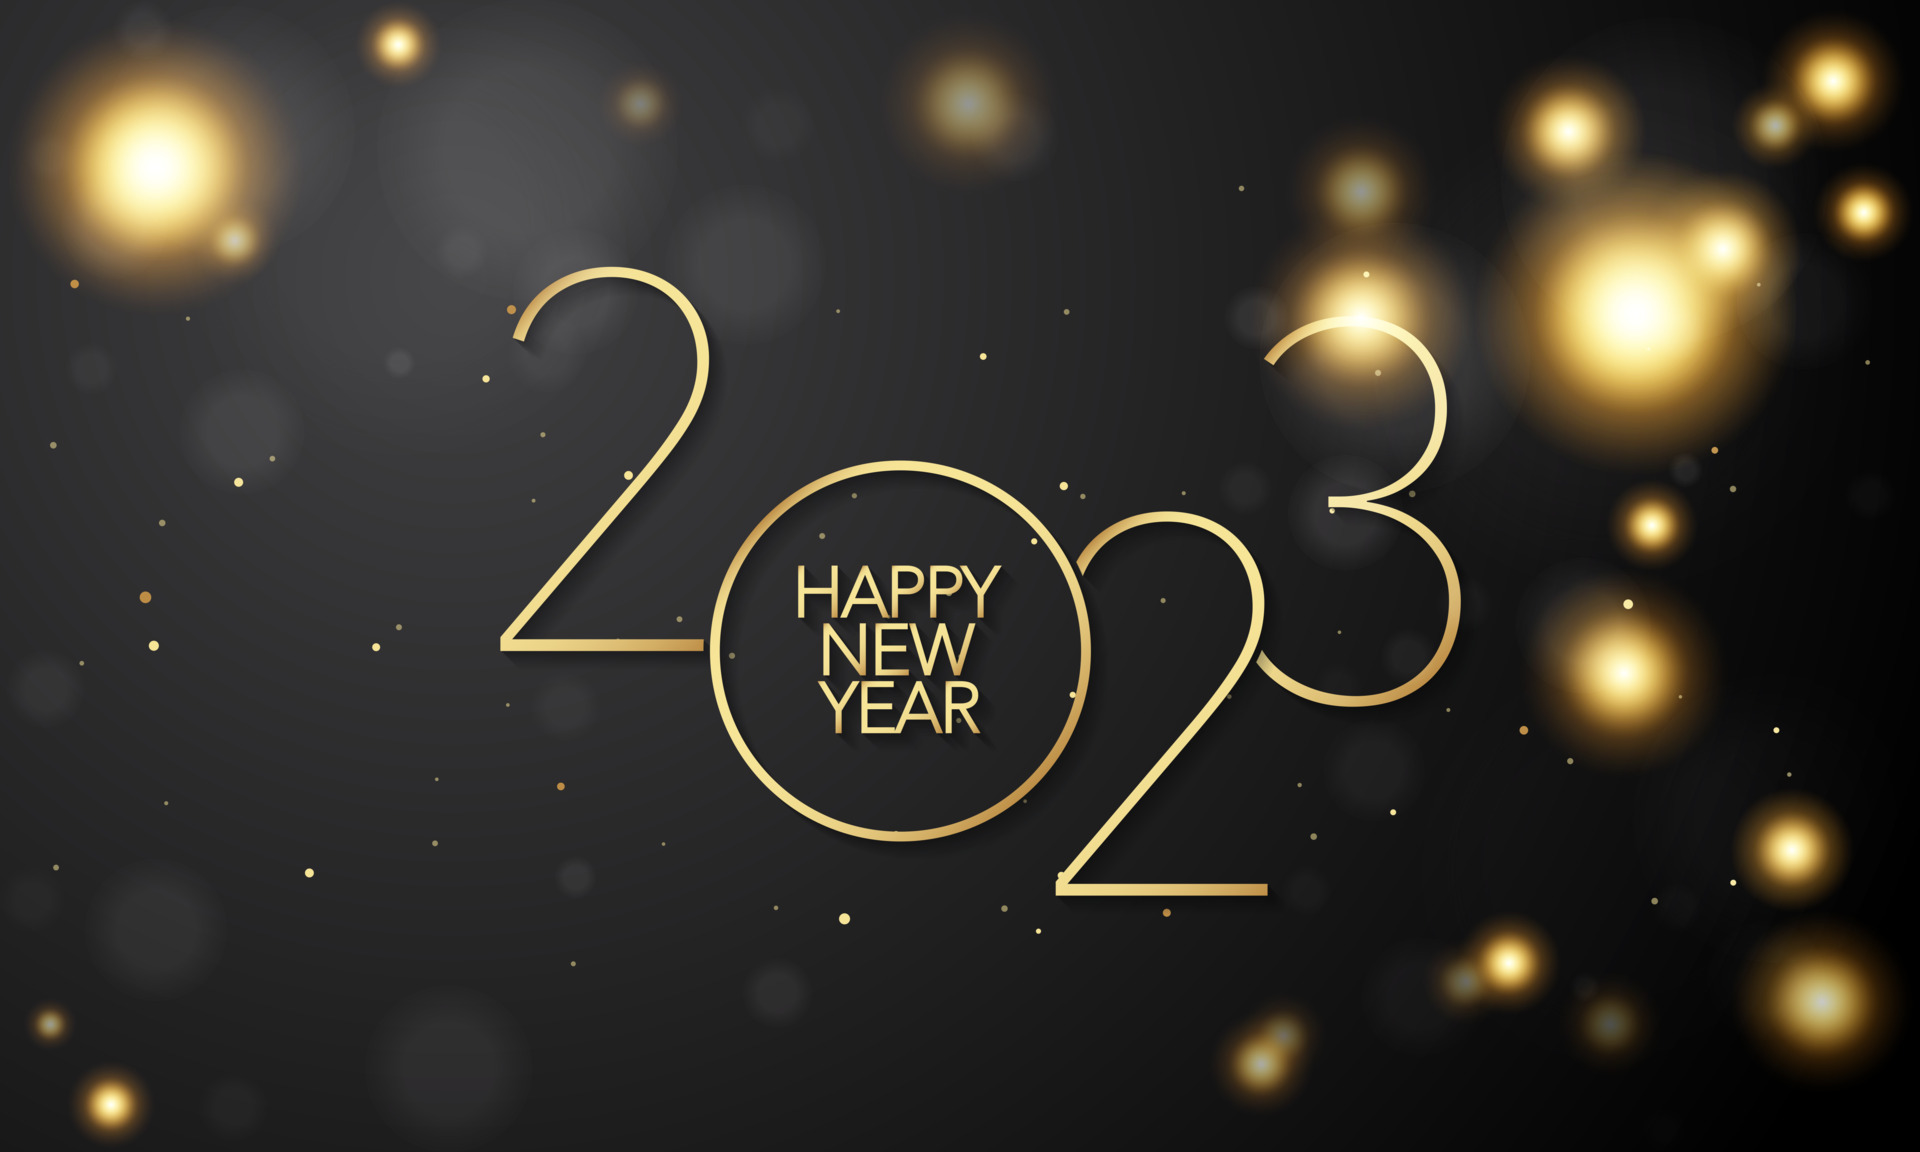 2023 Happy New Year Background Design. Golden 2023 Happy New Year Lettering on Black Background